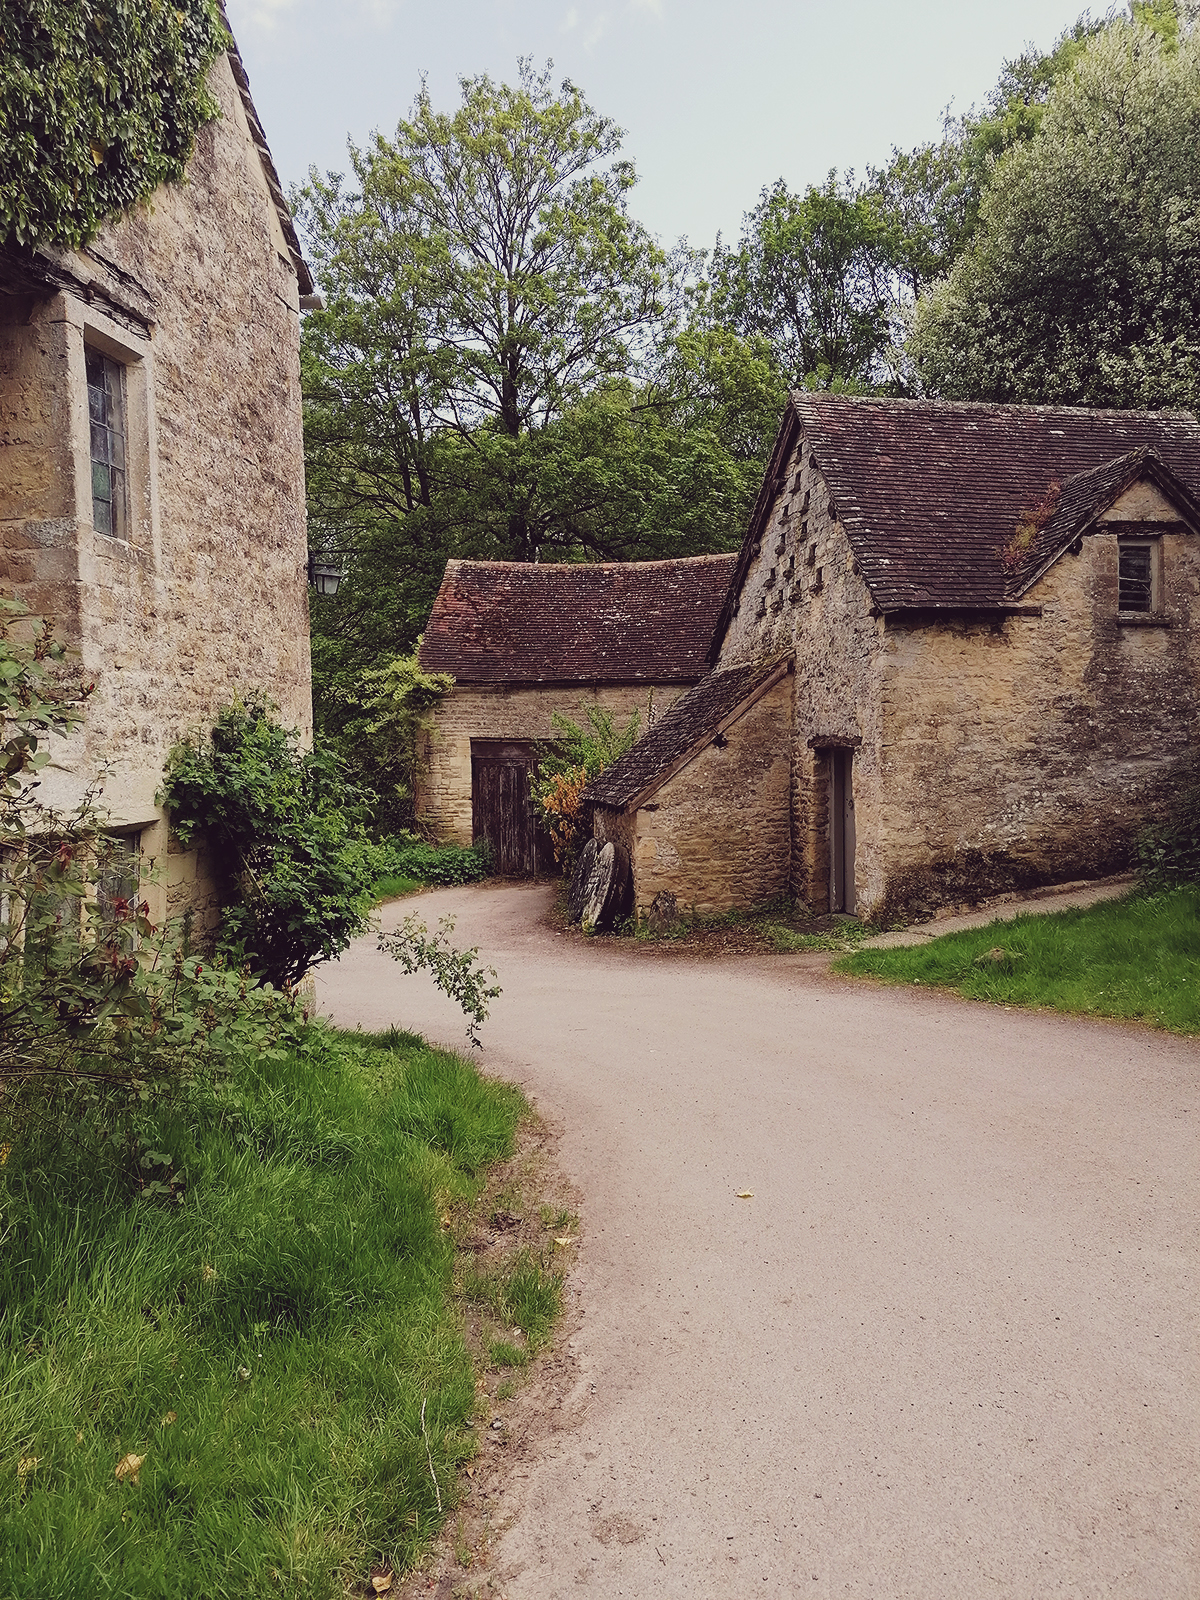 Old house in Bibury, Cotswolds